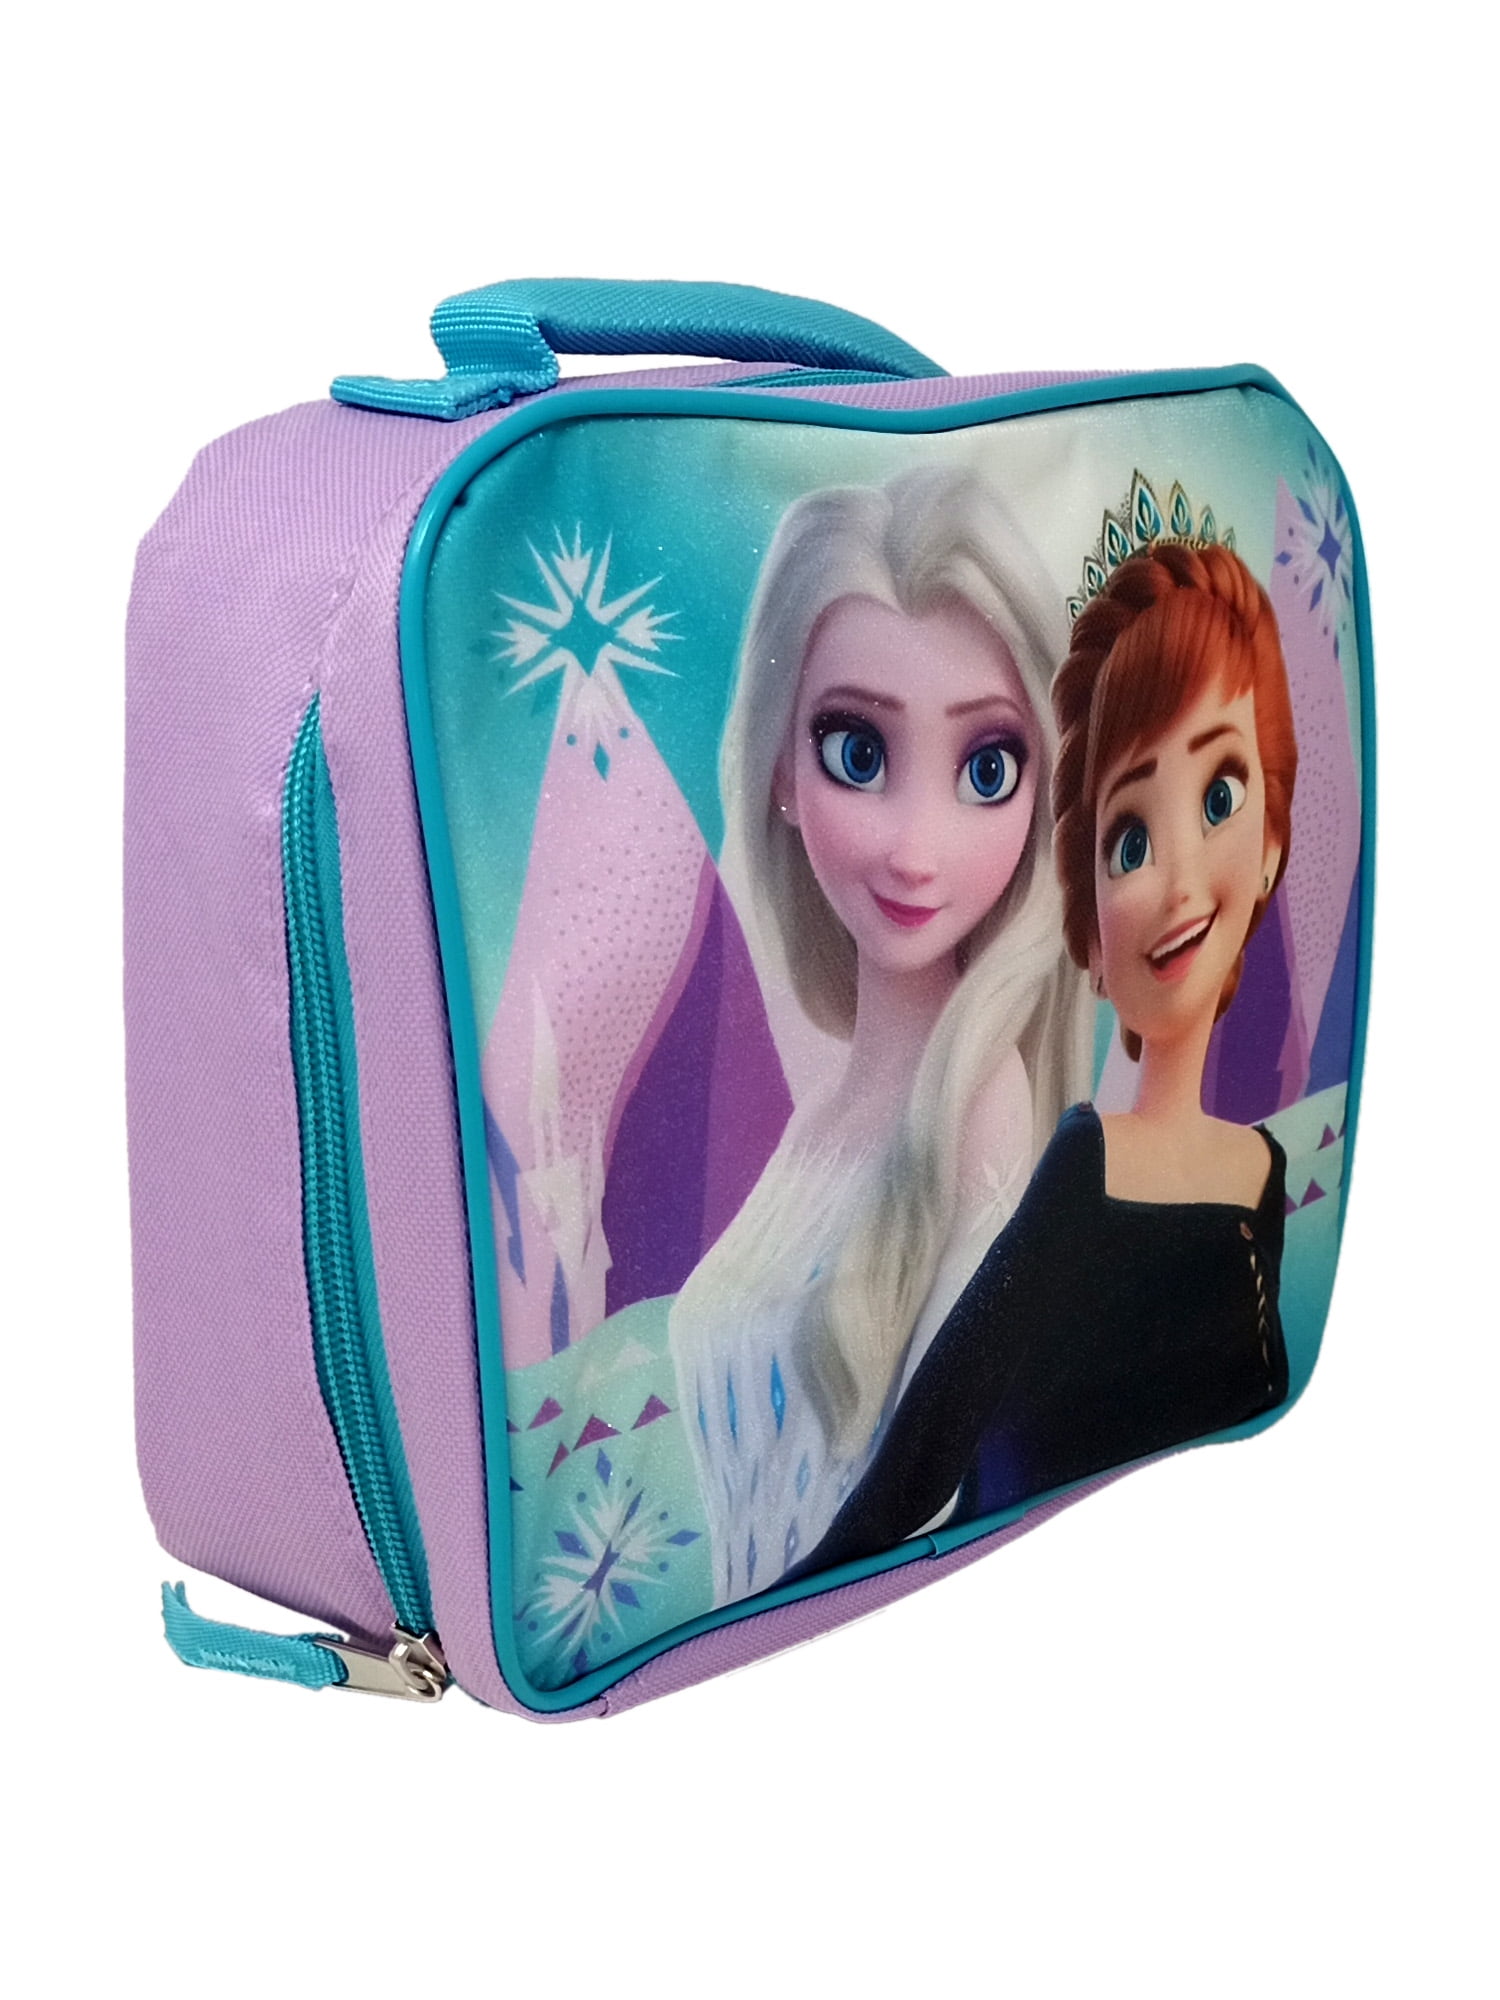 Disney Frozen Family Forever Anna and Elsa Insulated Lunch Bag